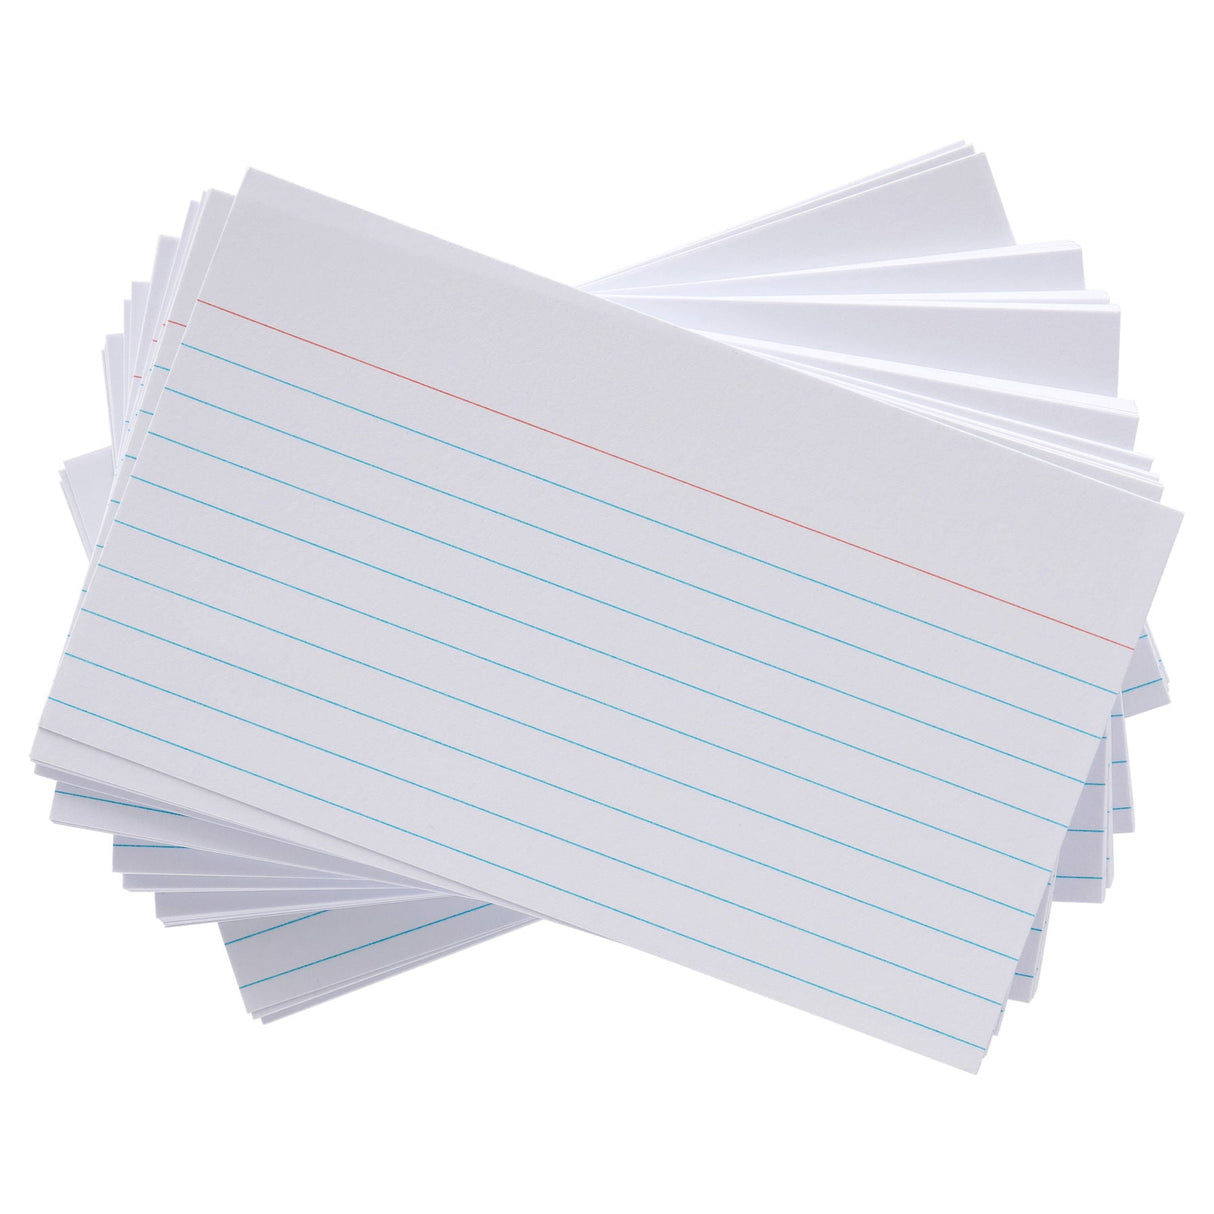 Premier Office 5 x 3 Ruled Record Cards - White - Pack of 100 | Stationery Shop UK